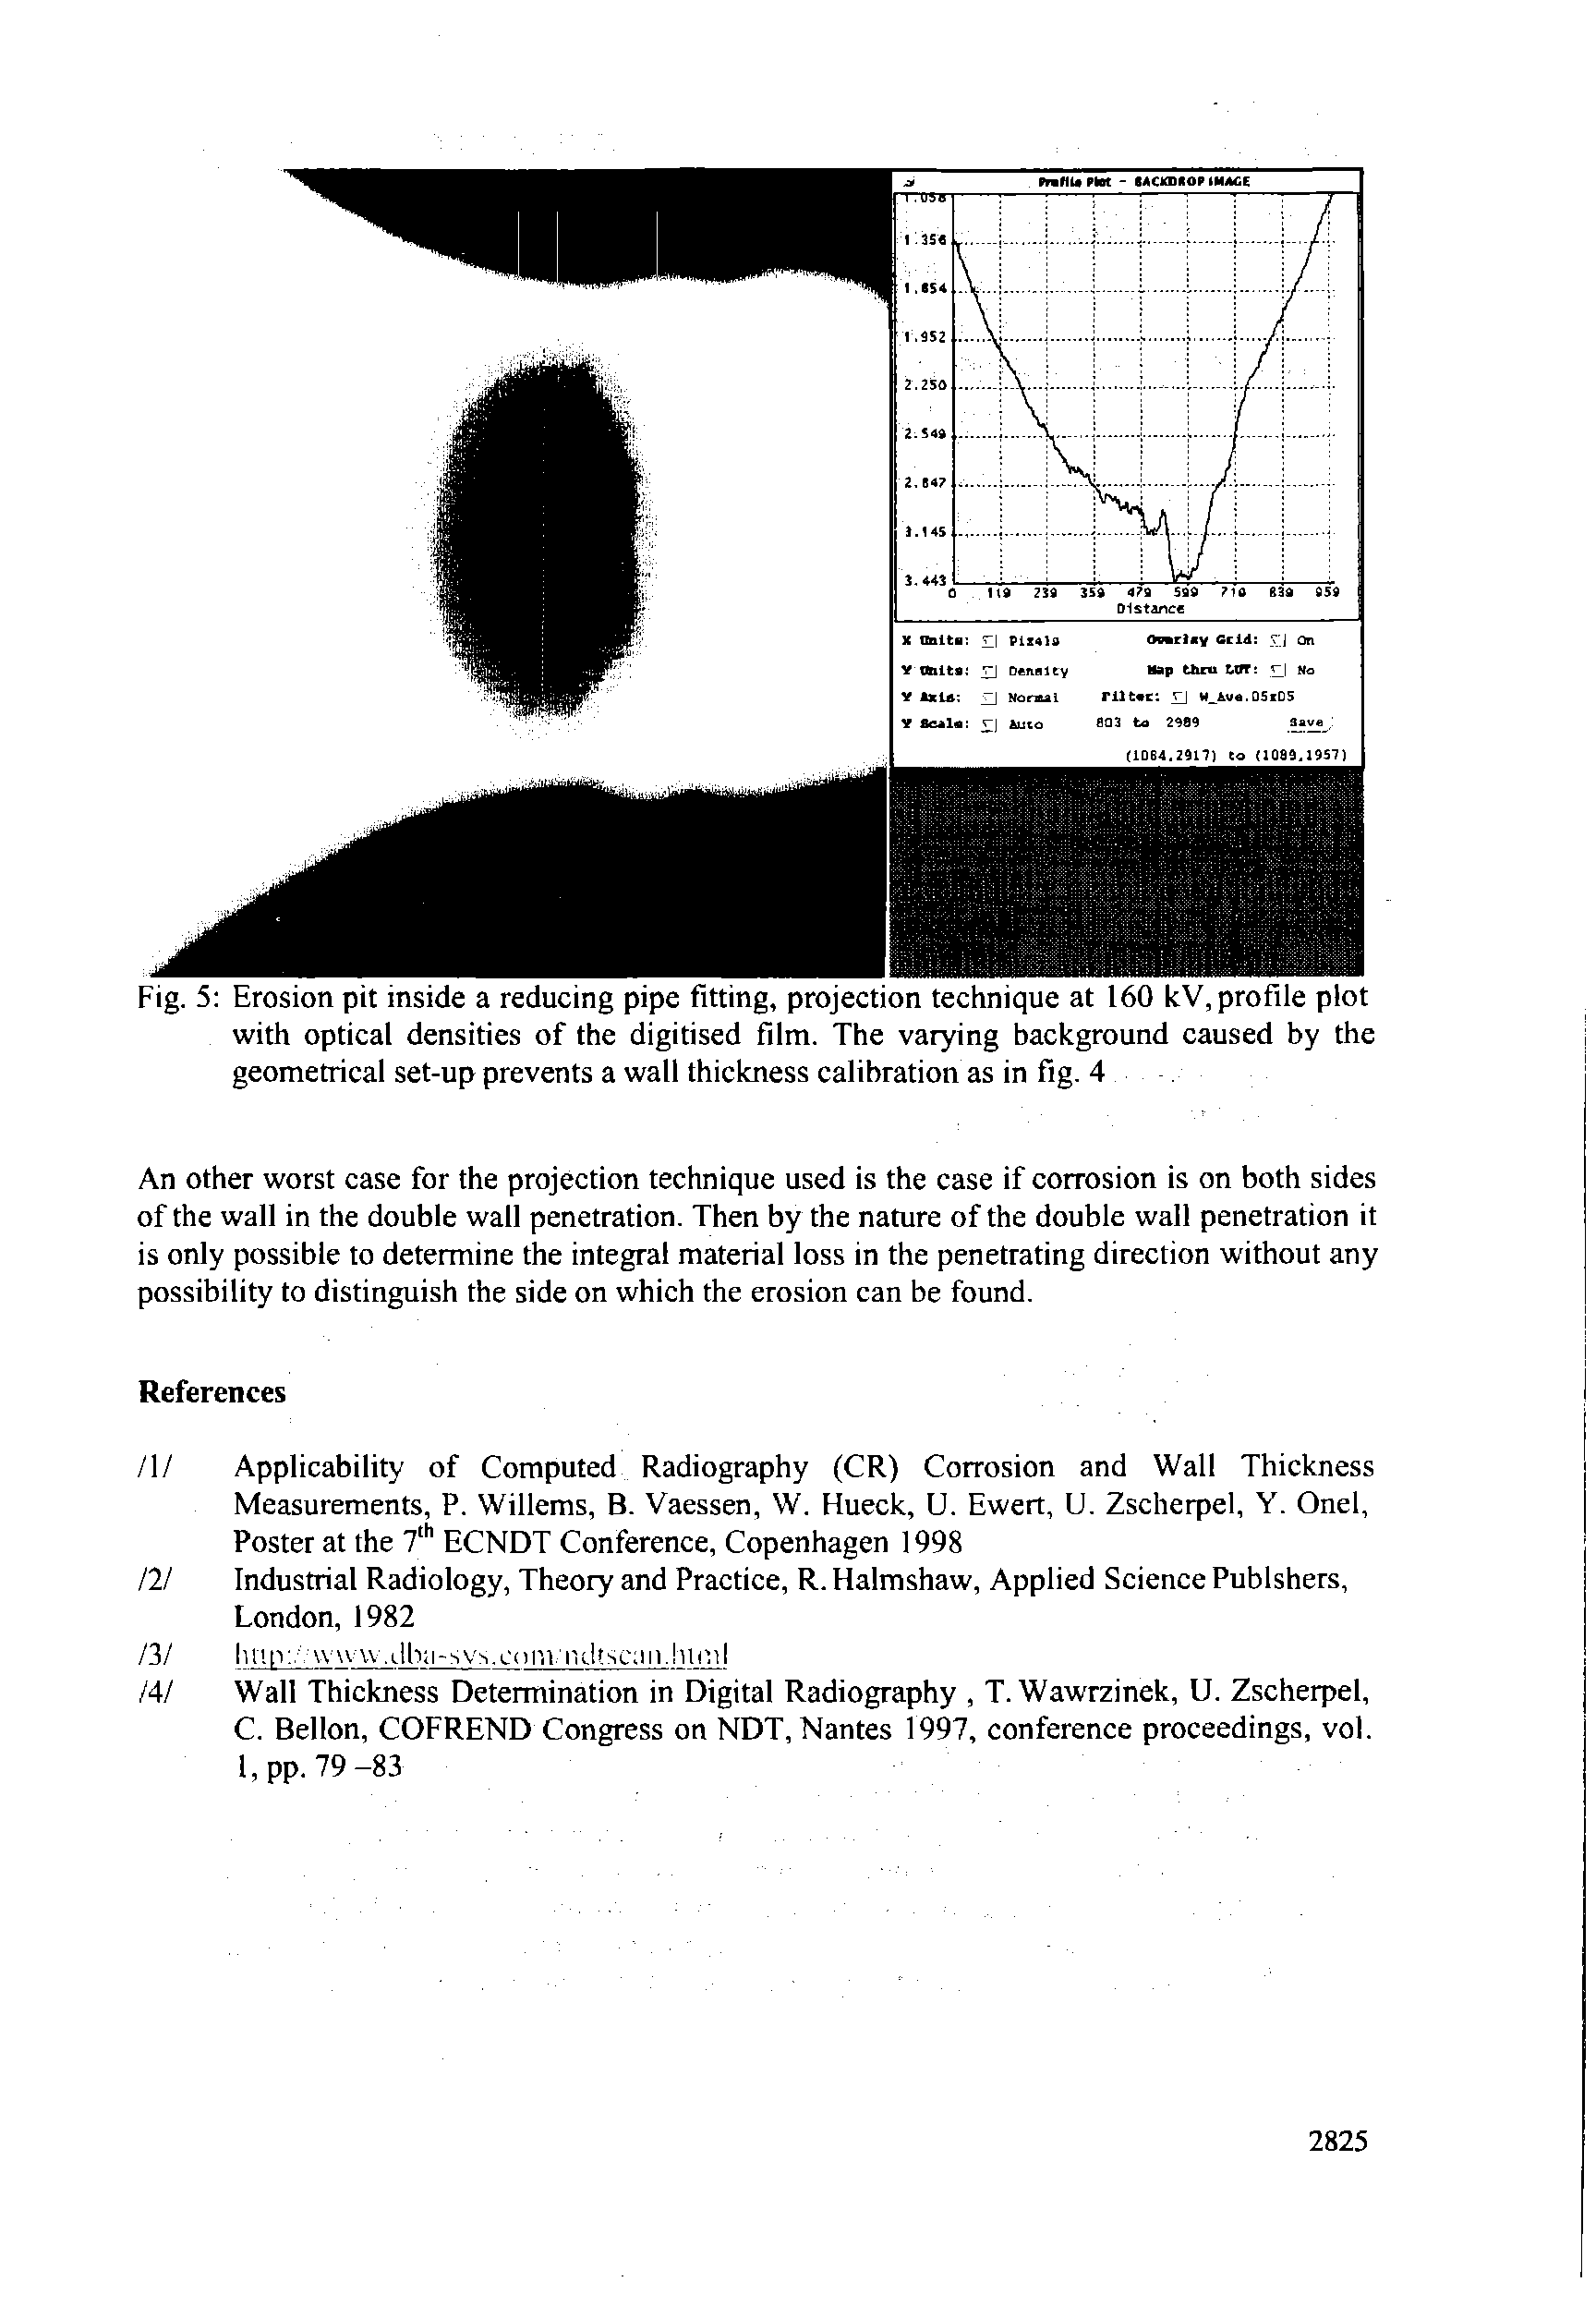 Fig. 5 Erosion pit inside a reducing pipe fitting, projection technique at 160 kV, profile plot with optical densities of the digitised film. The varying background caused by the geometrical set-up prevents a wall thickness calibration as in fig. 4...